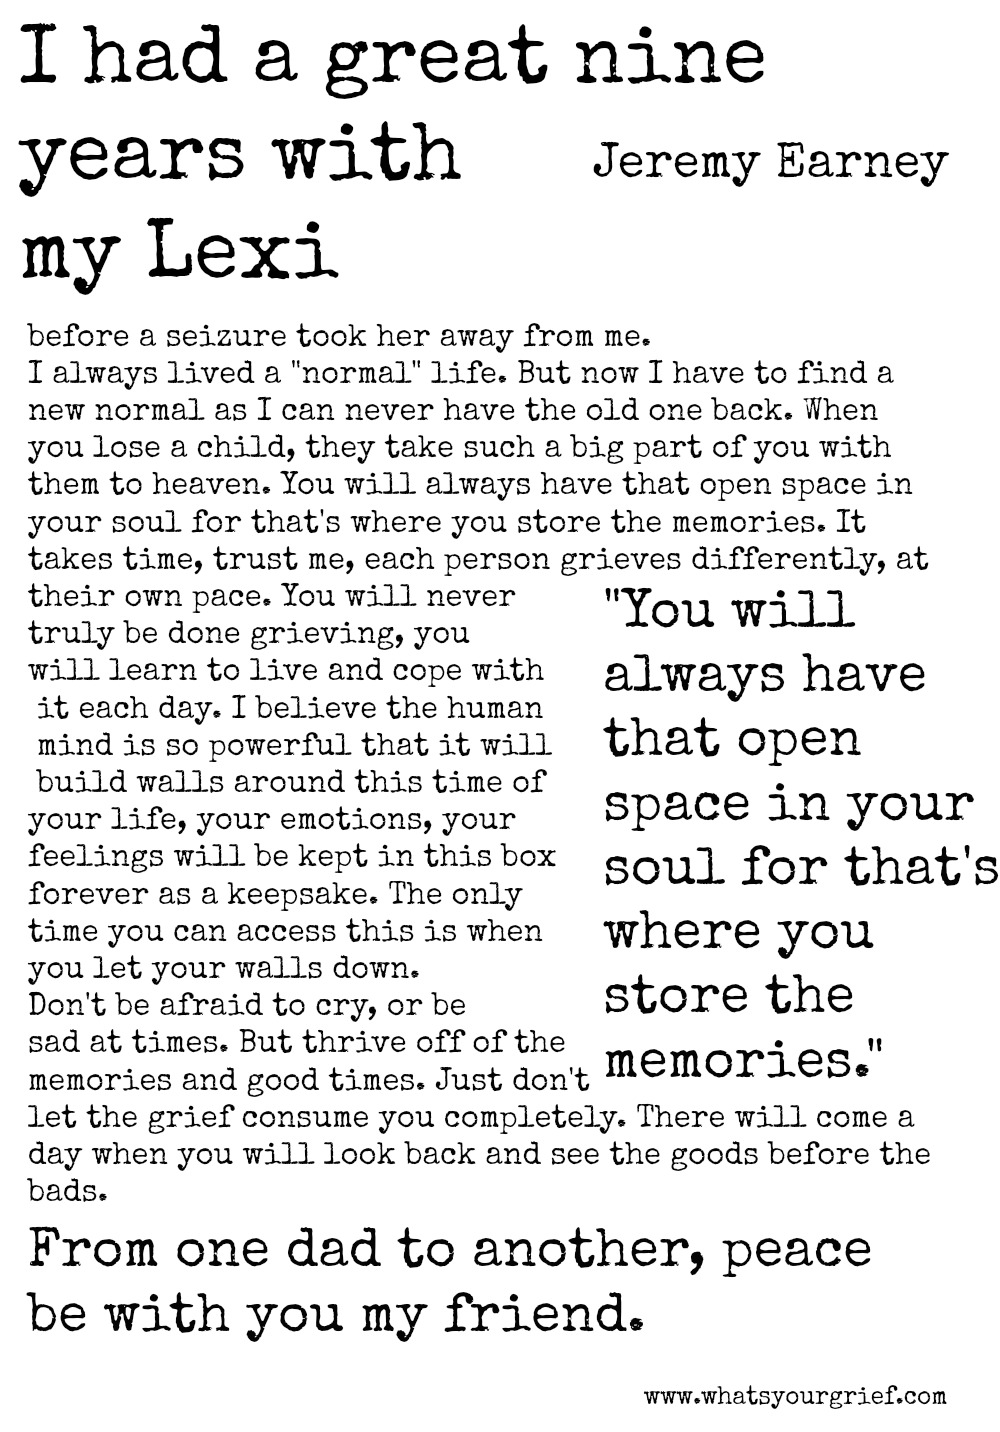 Jeremy Earney; I had a great nine year with my Lexi; letter from a grieving dad